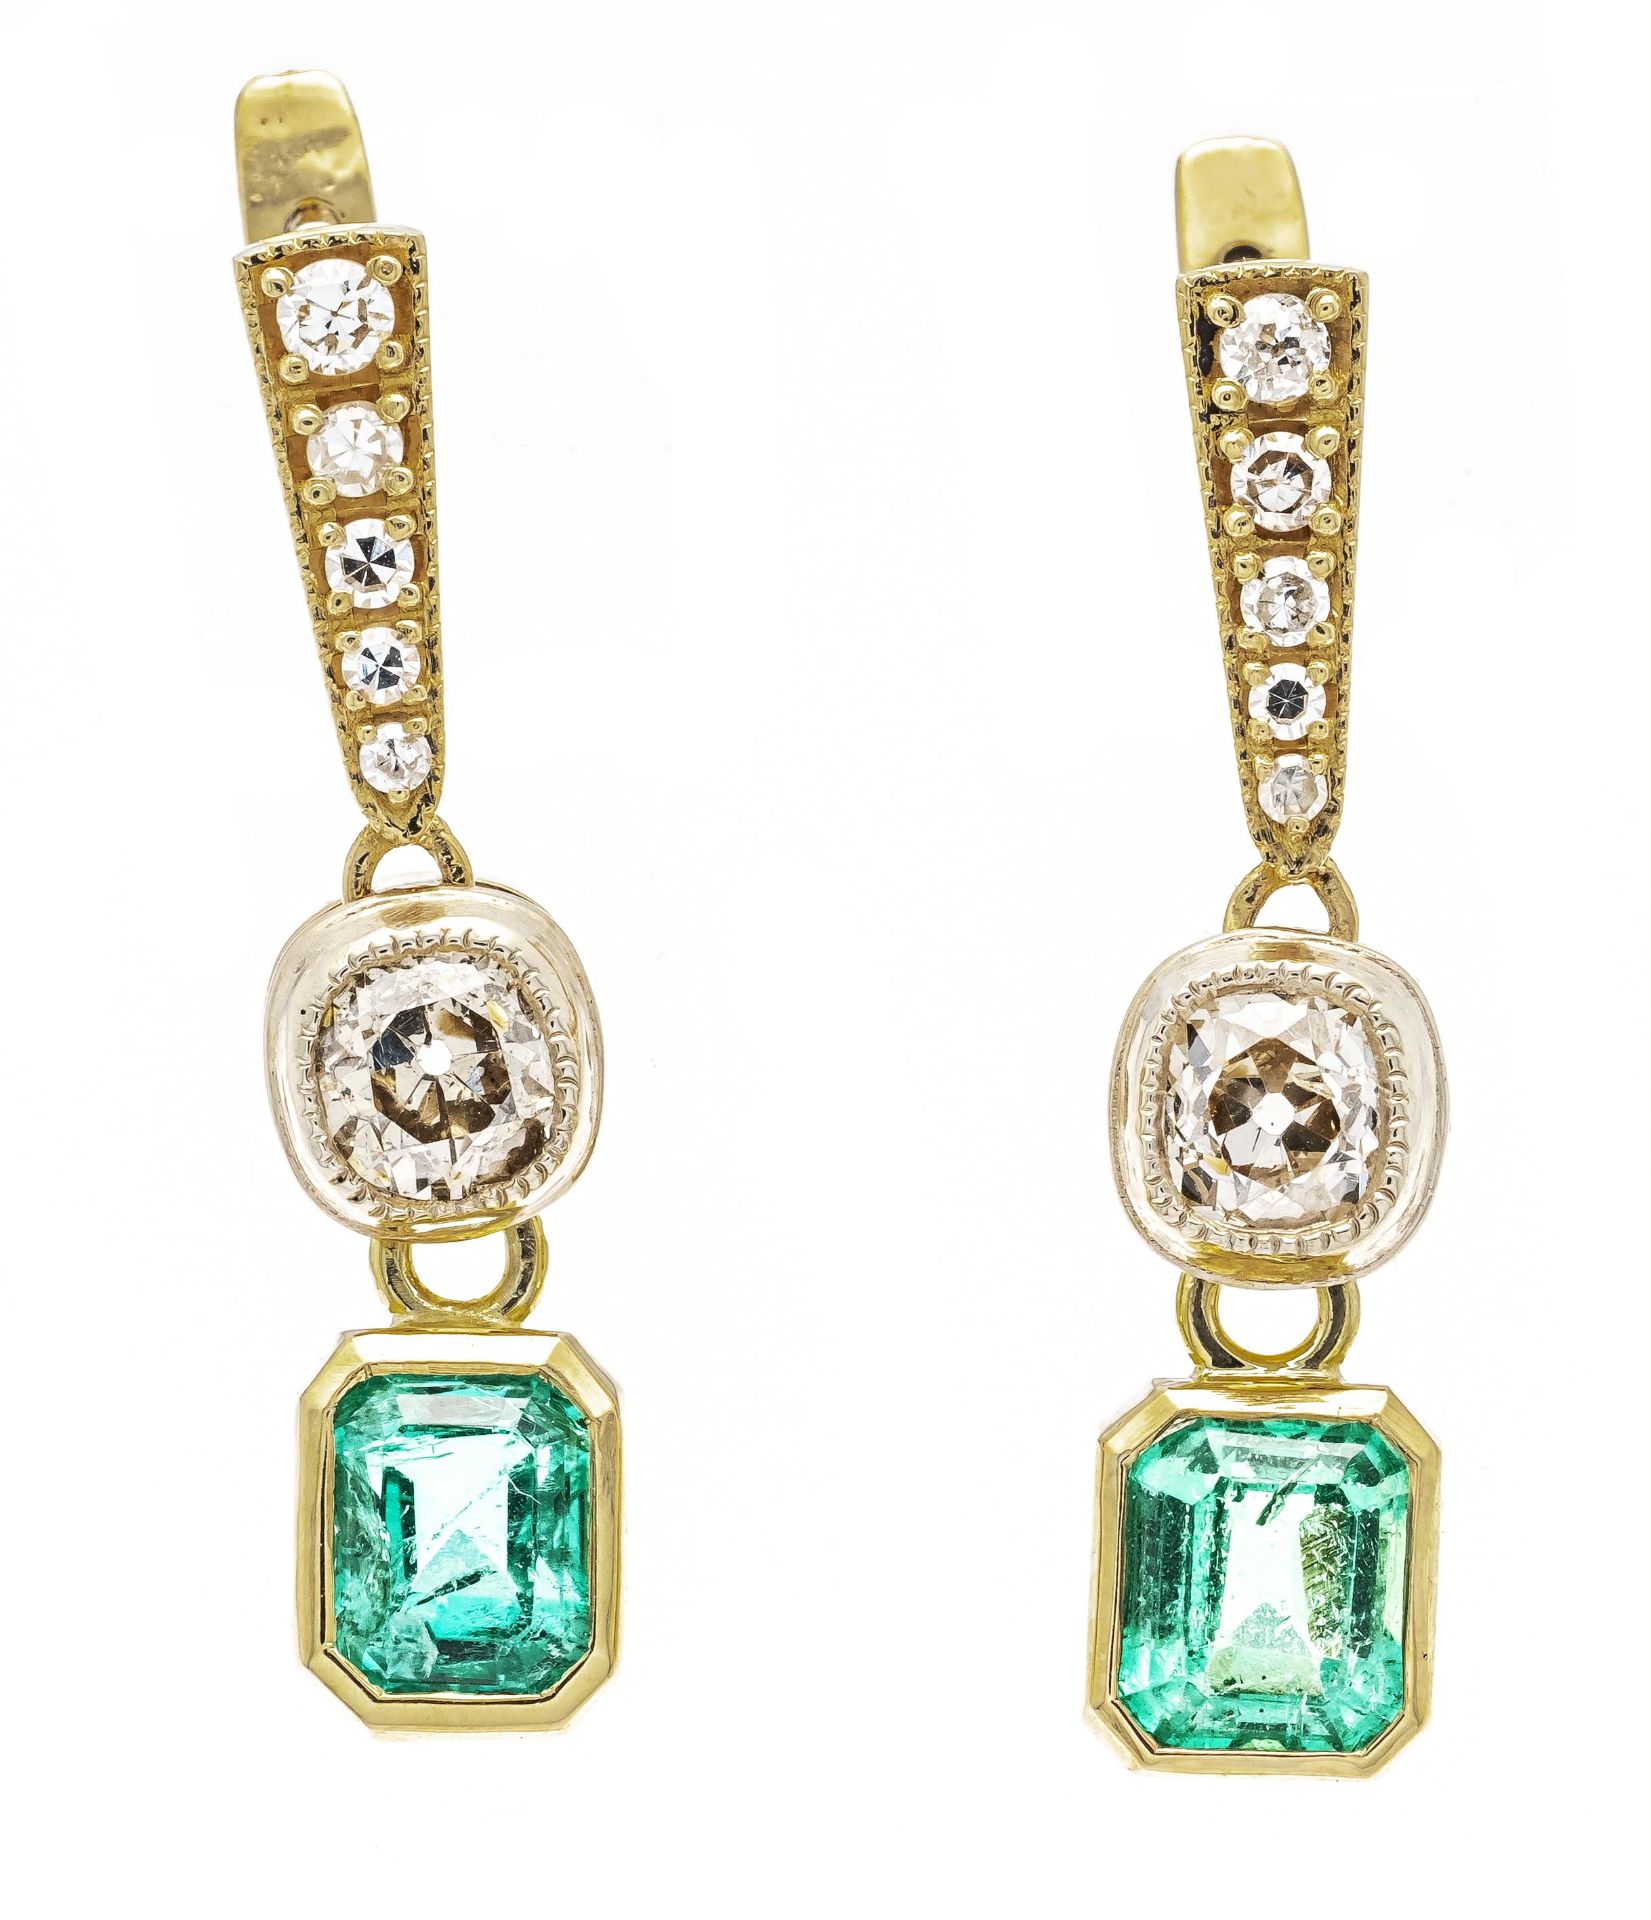 Emerald diamond earring in GG/WG 585/000 unstamped, tested, with 2 excellent emerald cut faceted